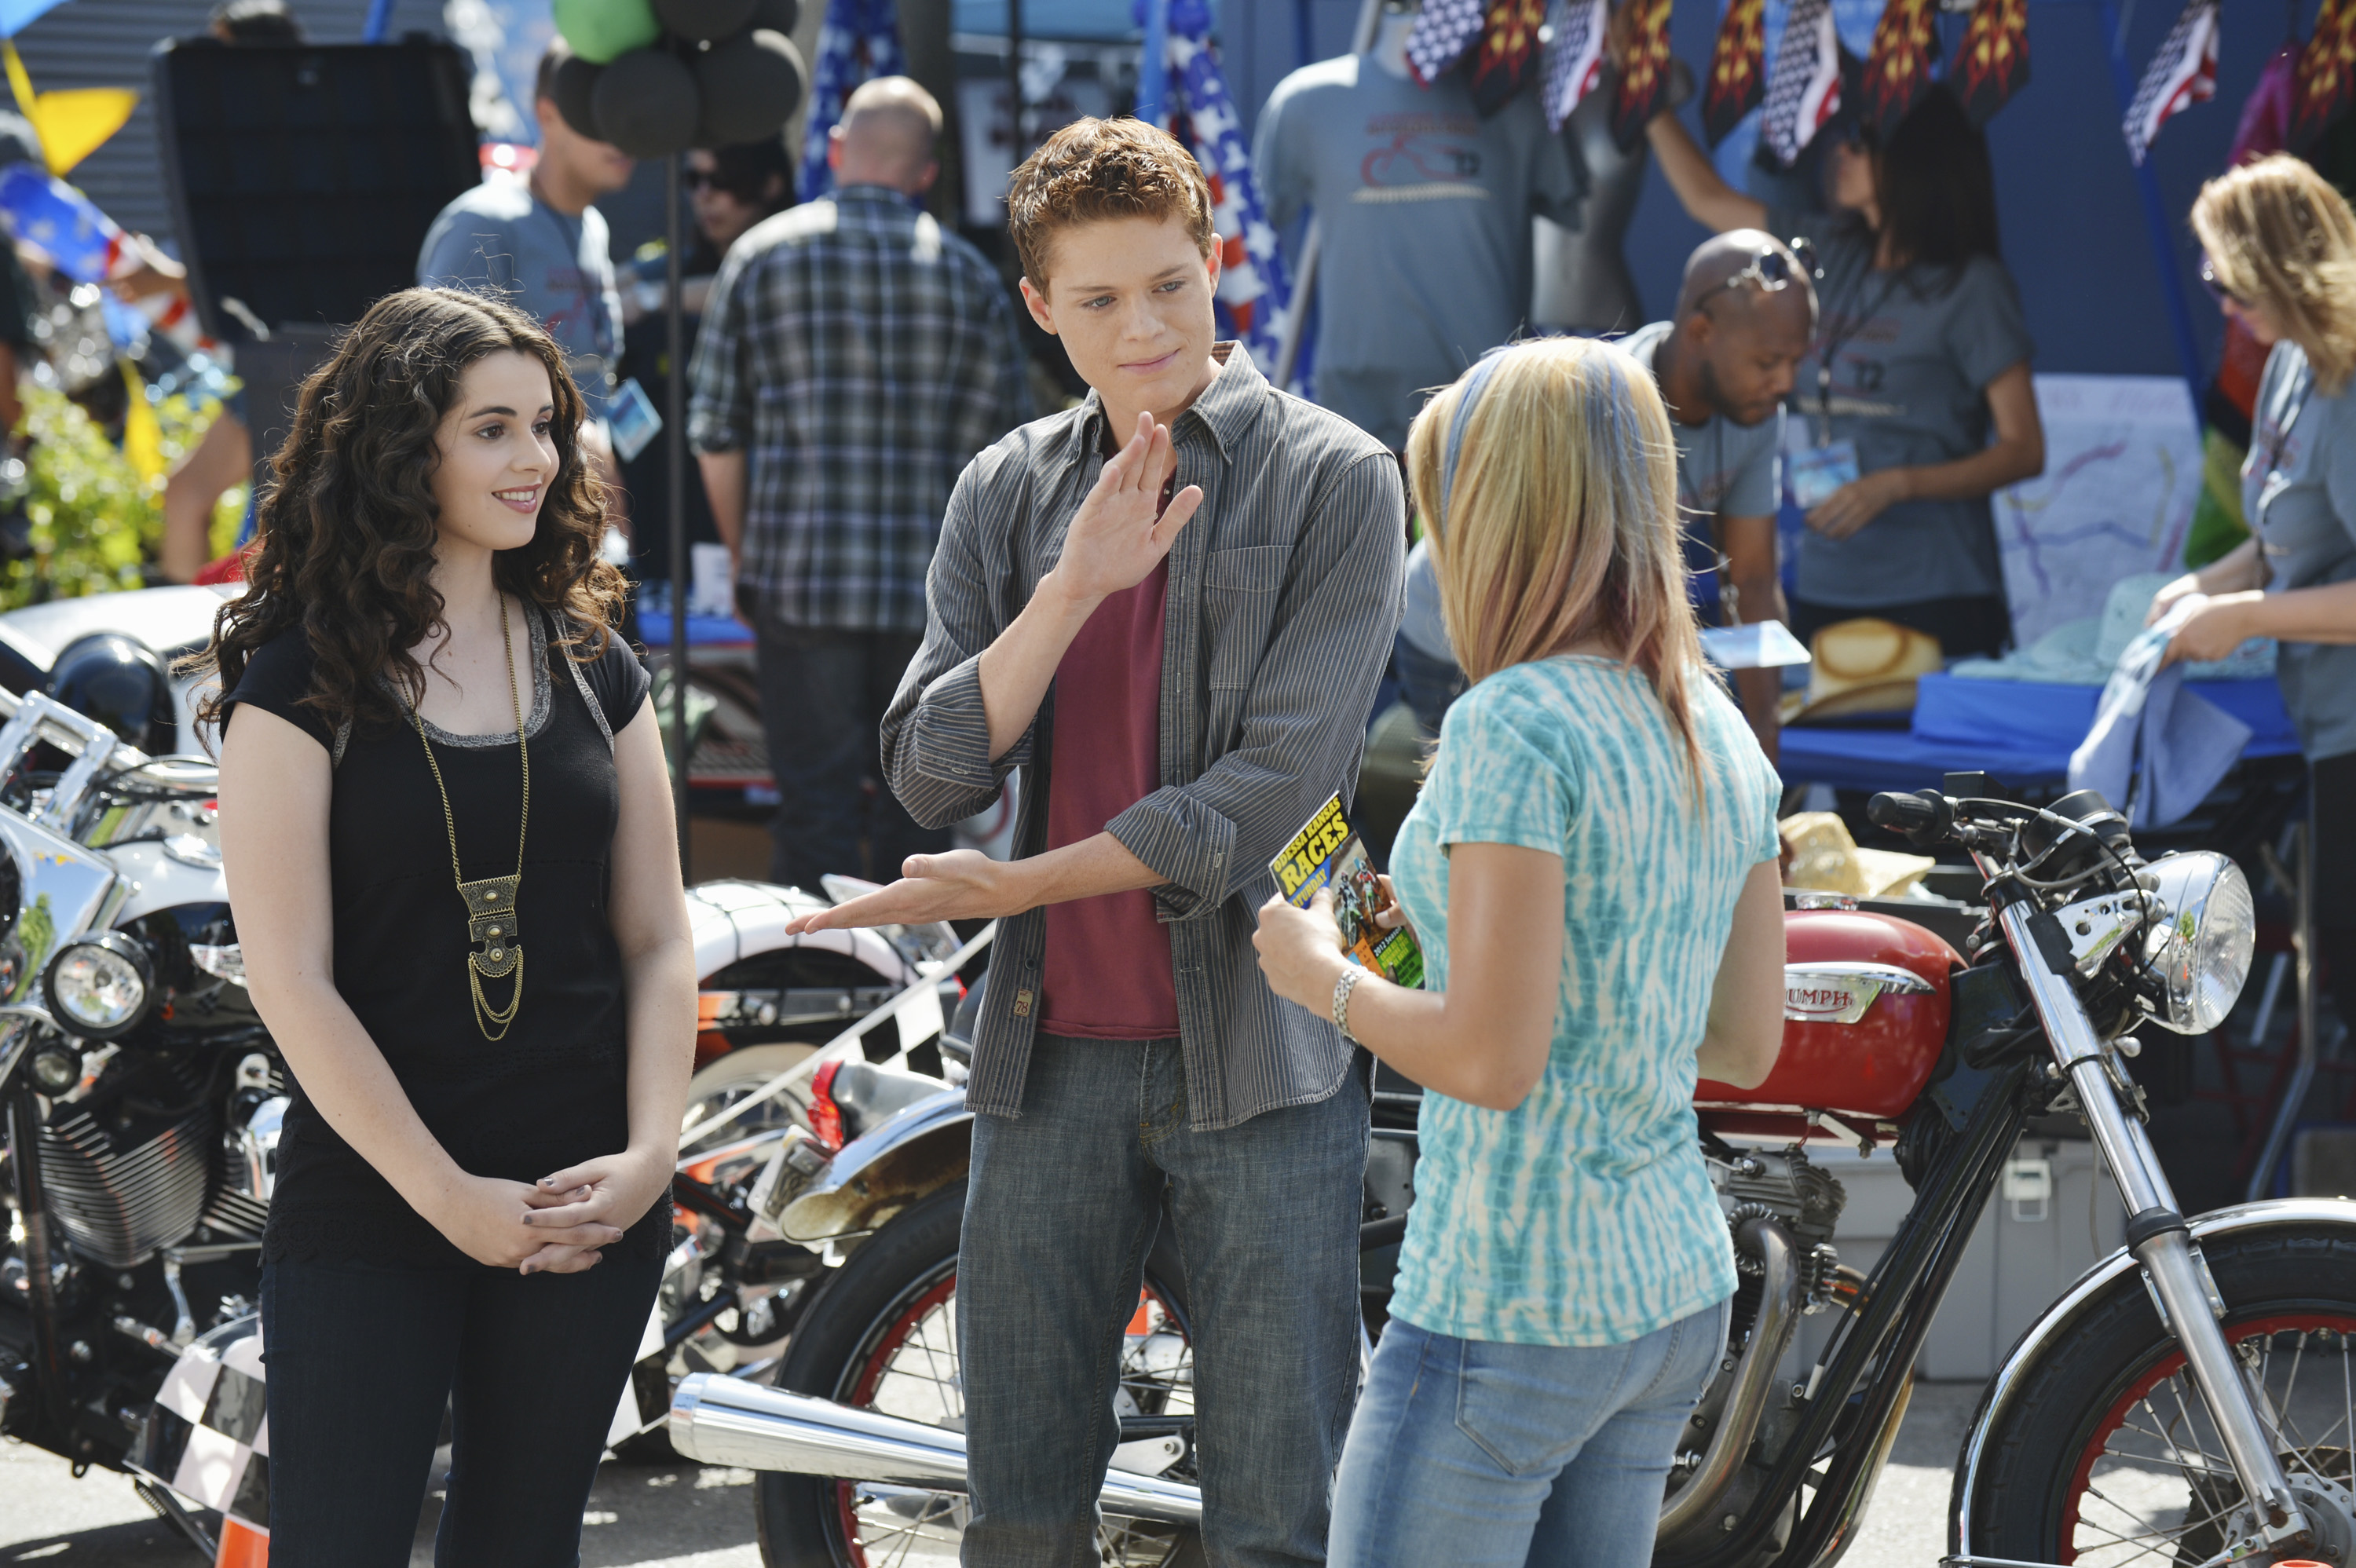 Sean Berdy in Switched at Birth